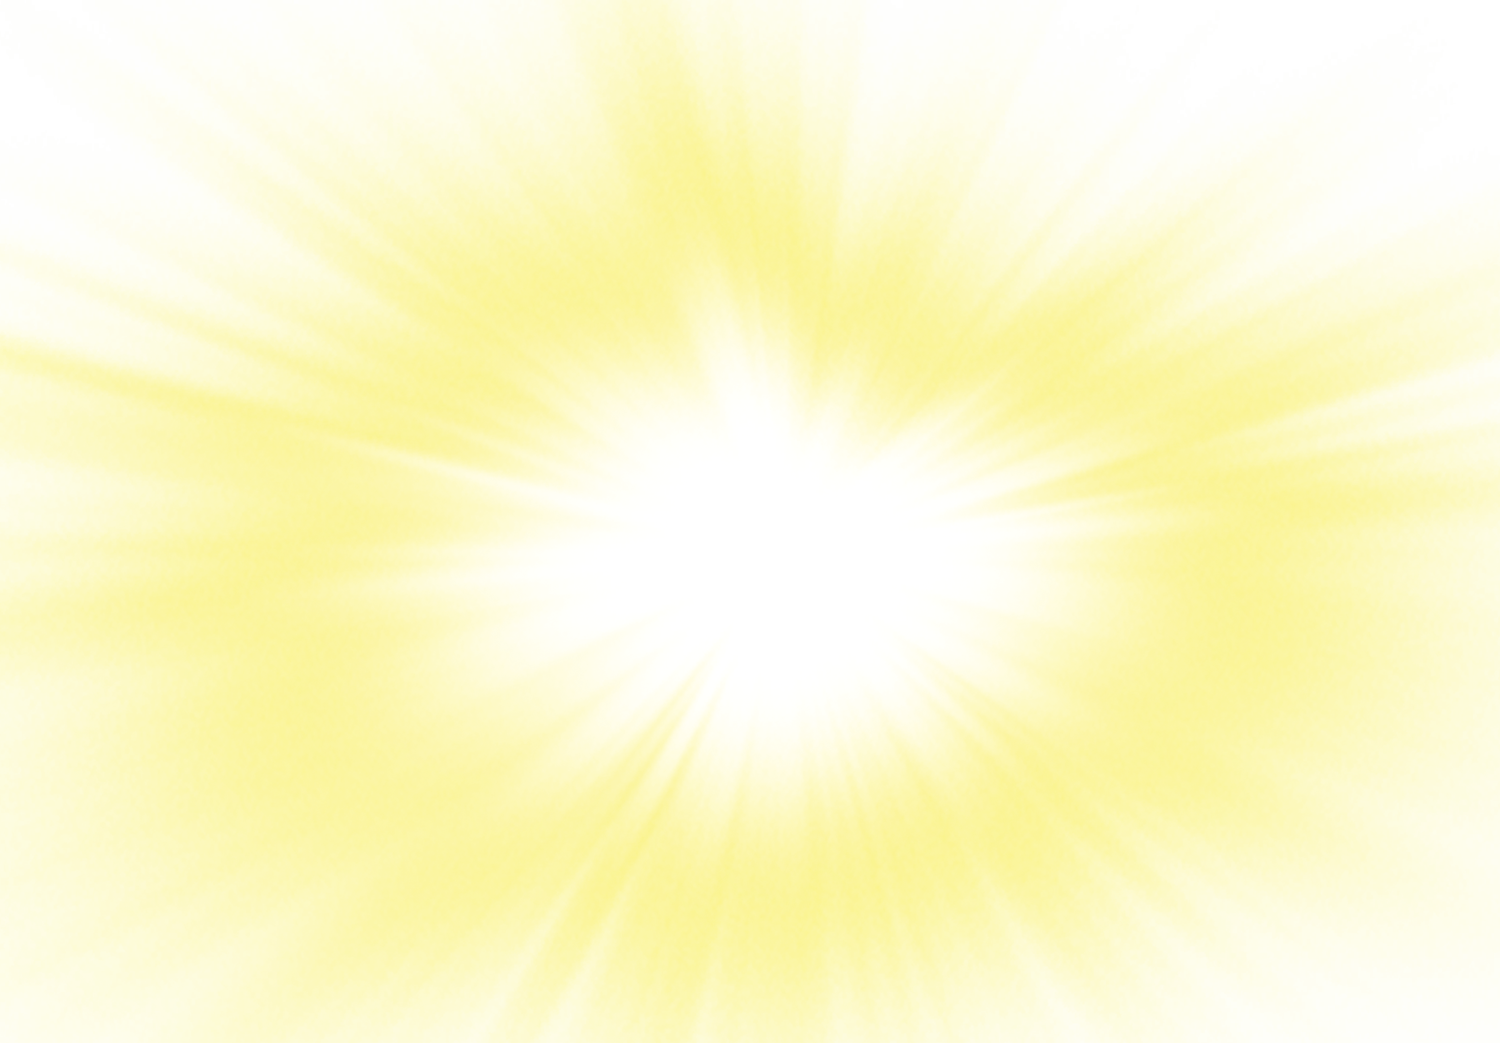 Sun Ray PNG Images